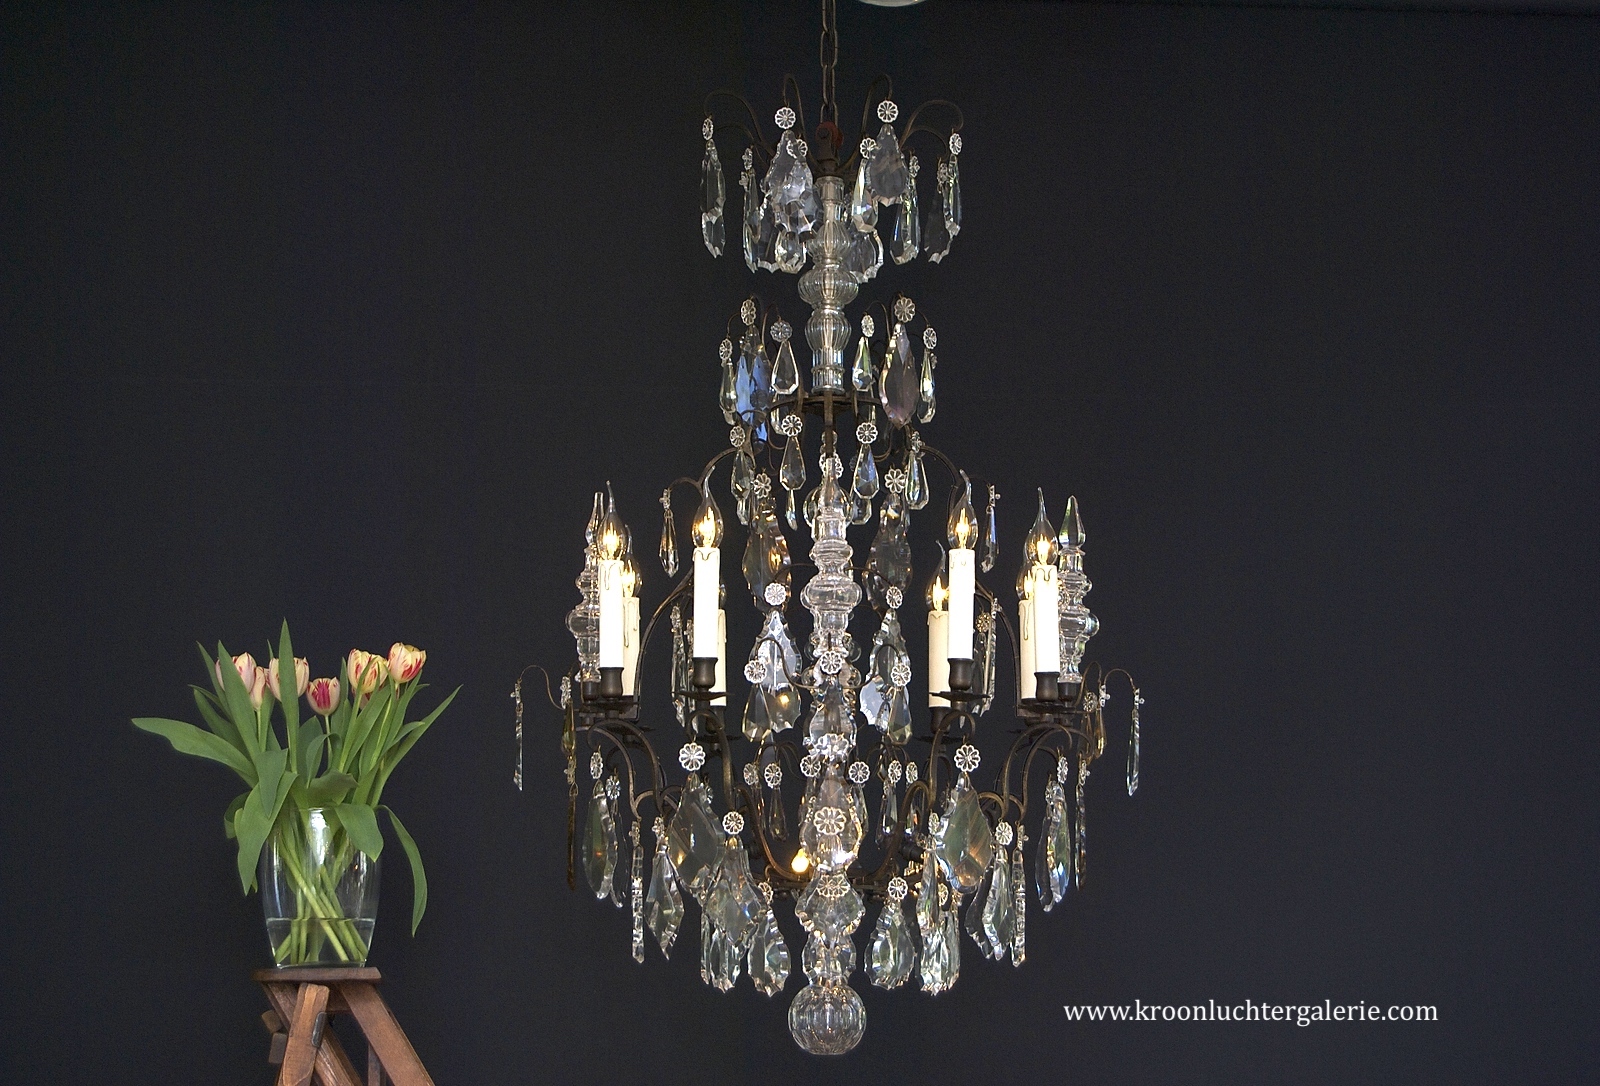 A wonderful early 20th c. French chandelier with dark patina